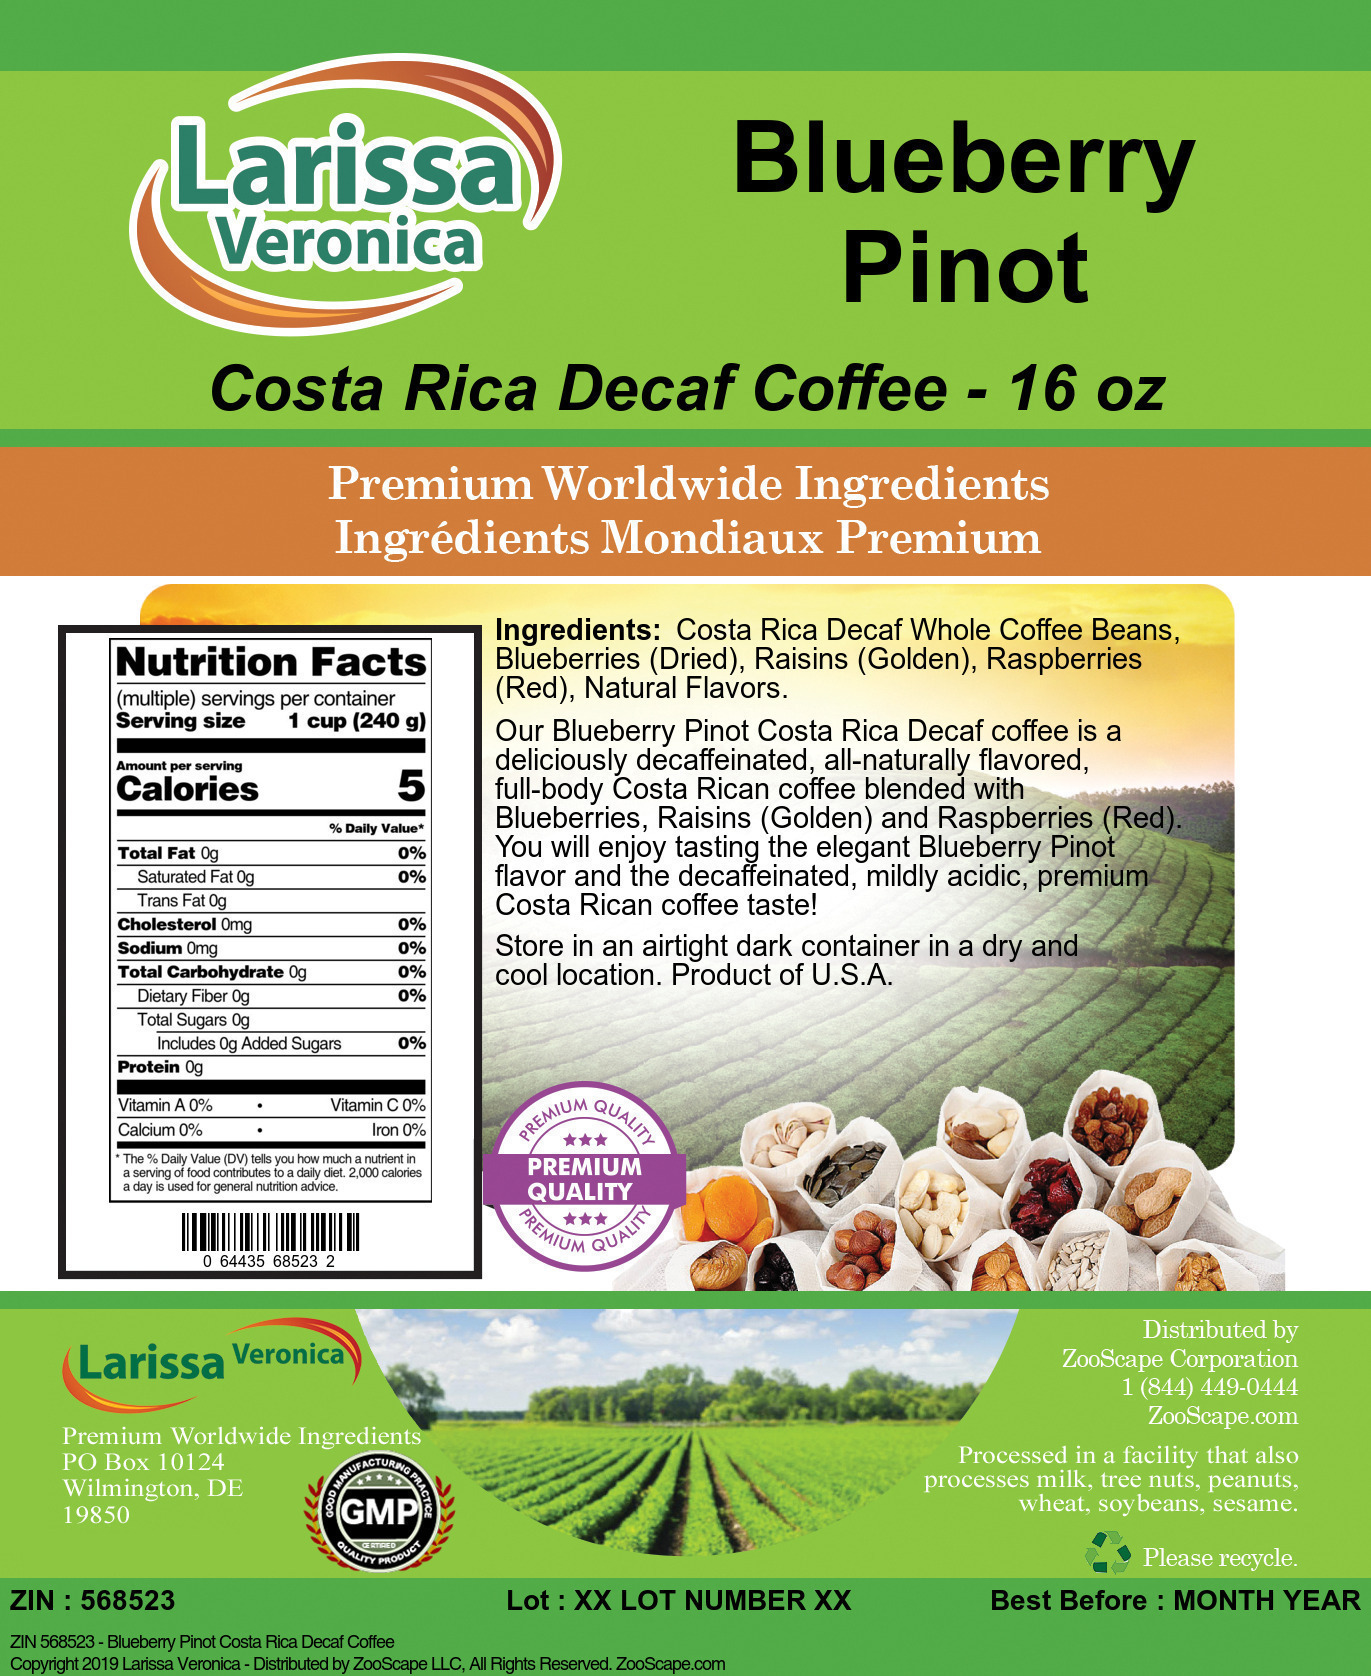 Blueberry Pinot Costa Rica Decaf Coffee - Label